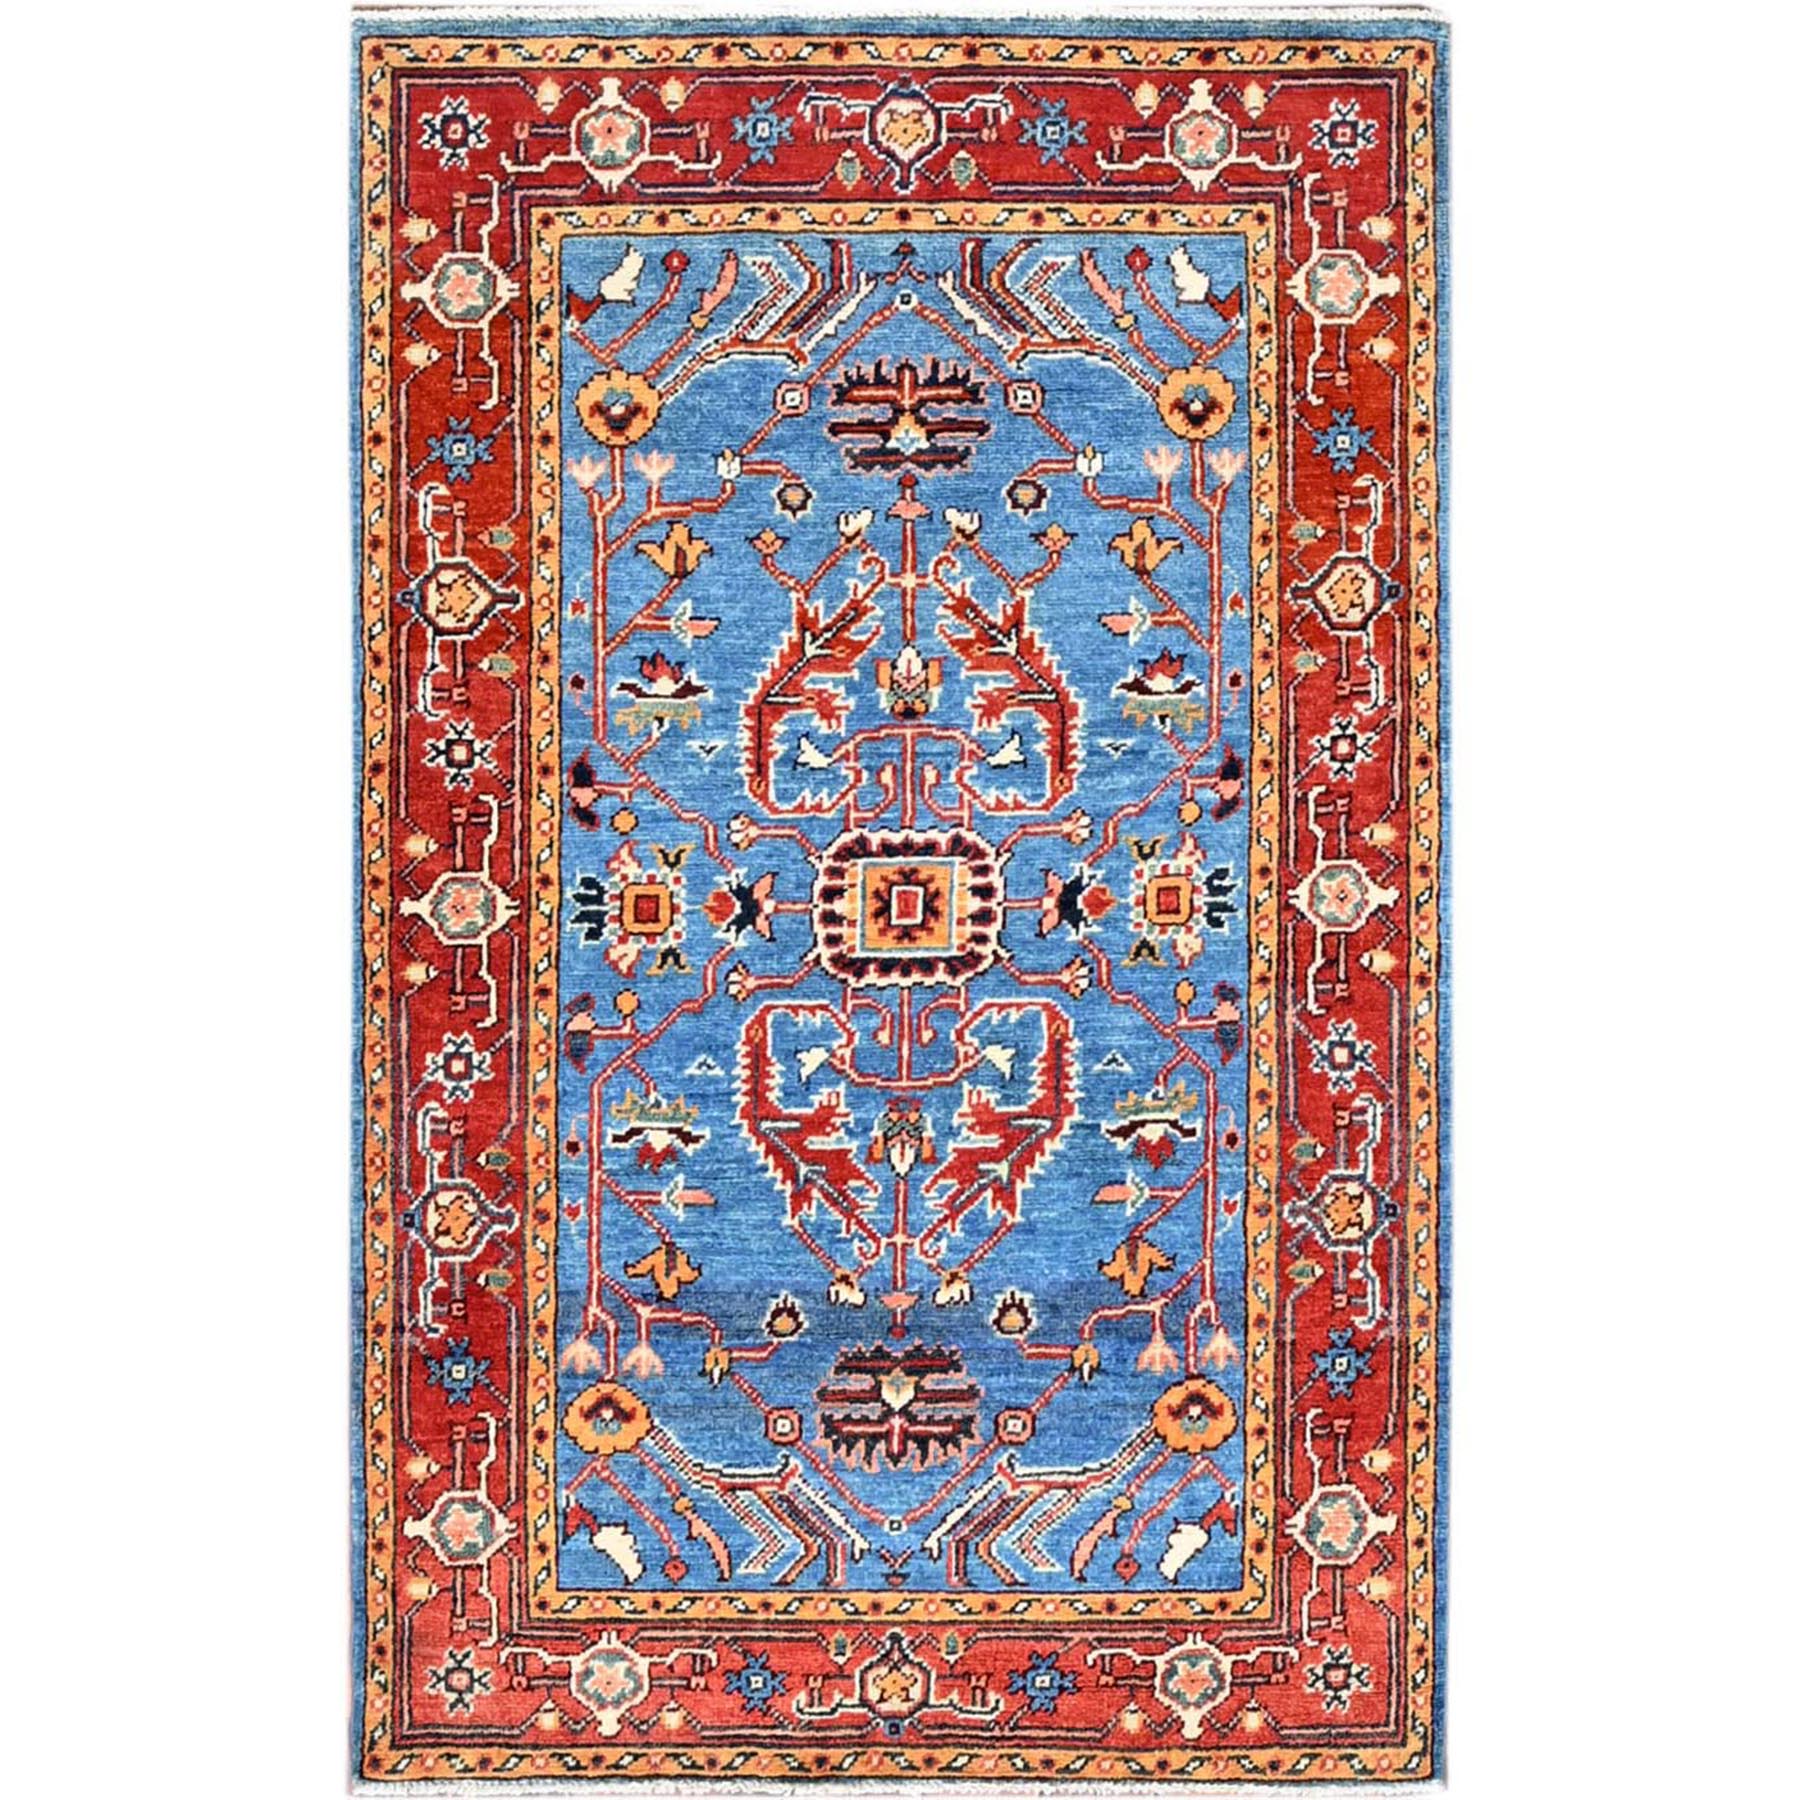  Wool Hand-Knotted Area Rug 2'11